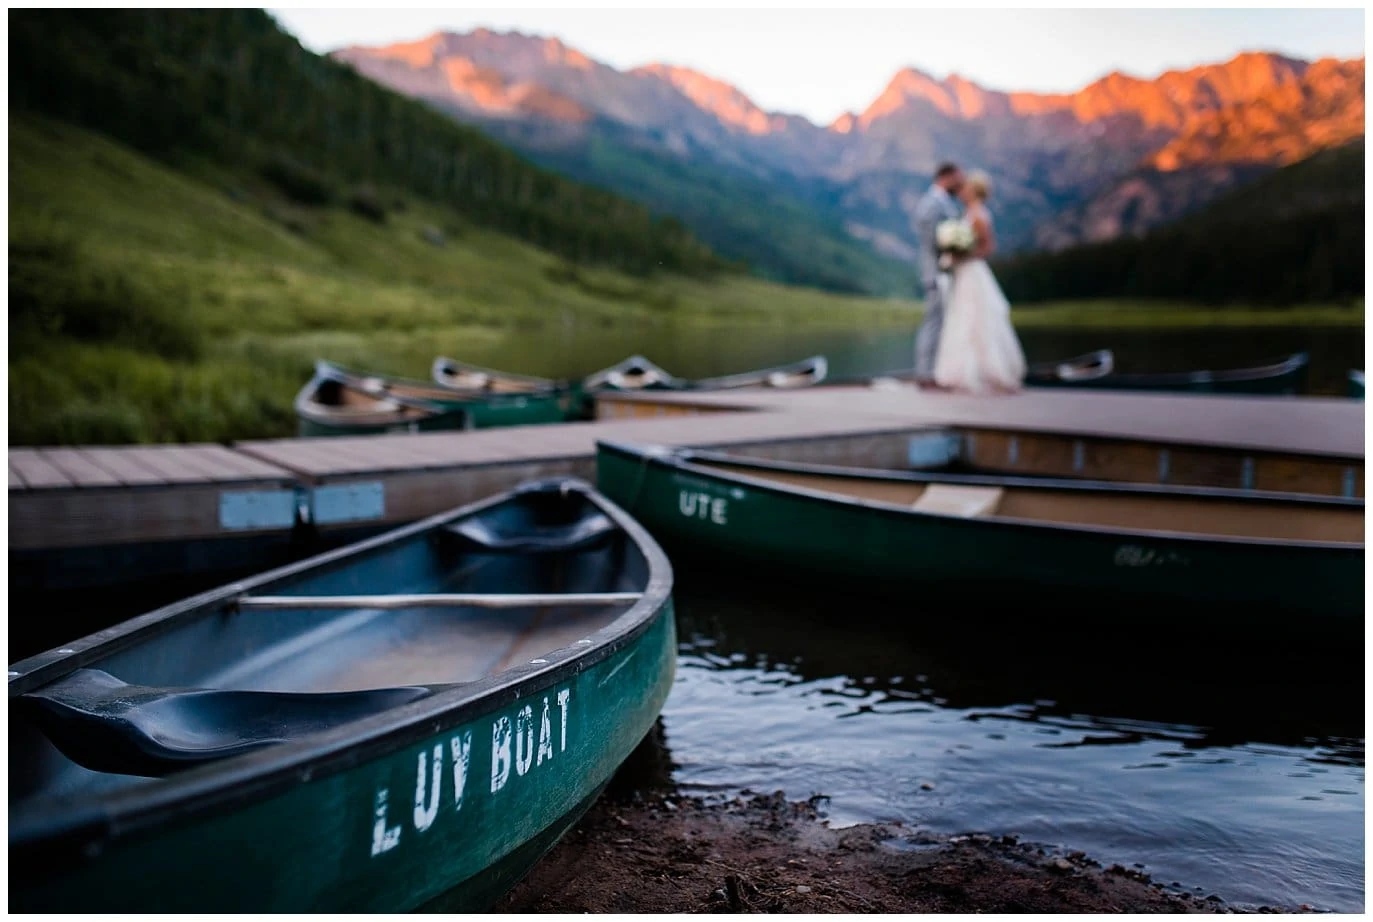 Luv Boat canoe sunset wedding photos at Piney River Ranch wedding by Vail wedding photographer Jennie Crate, Photographer